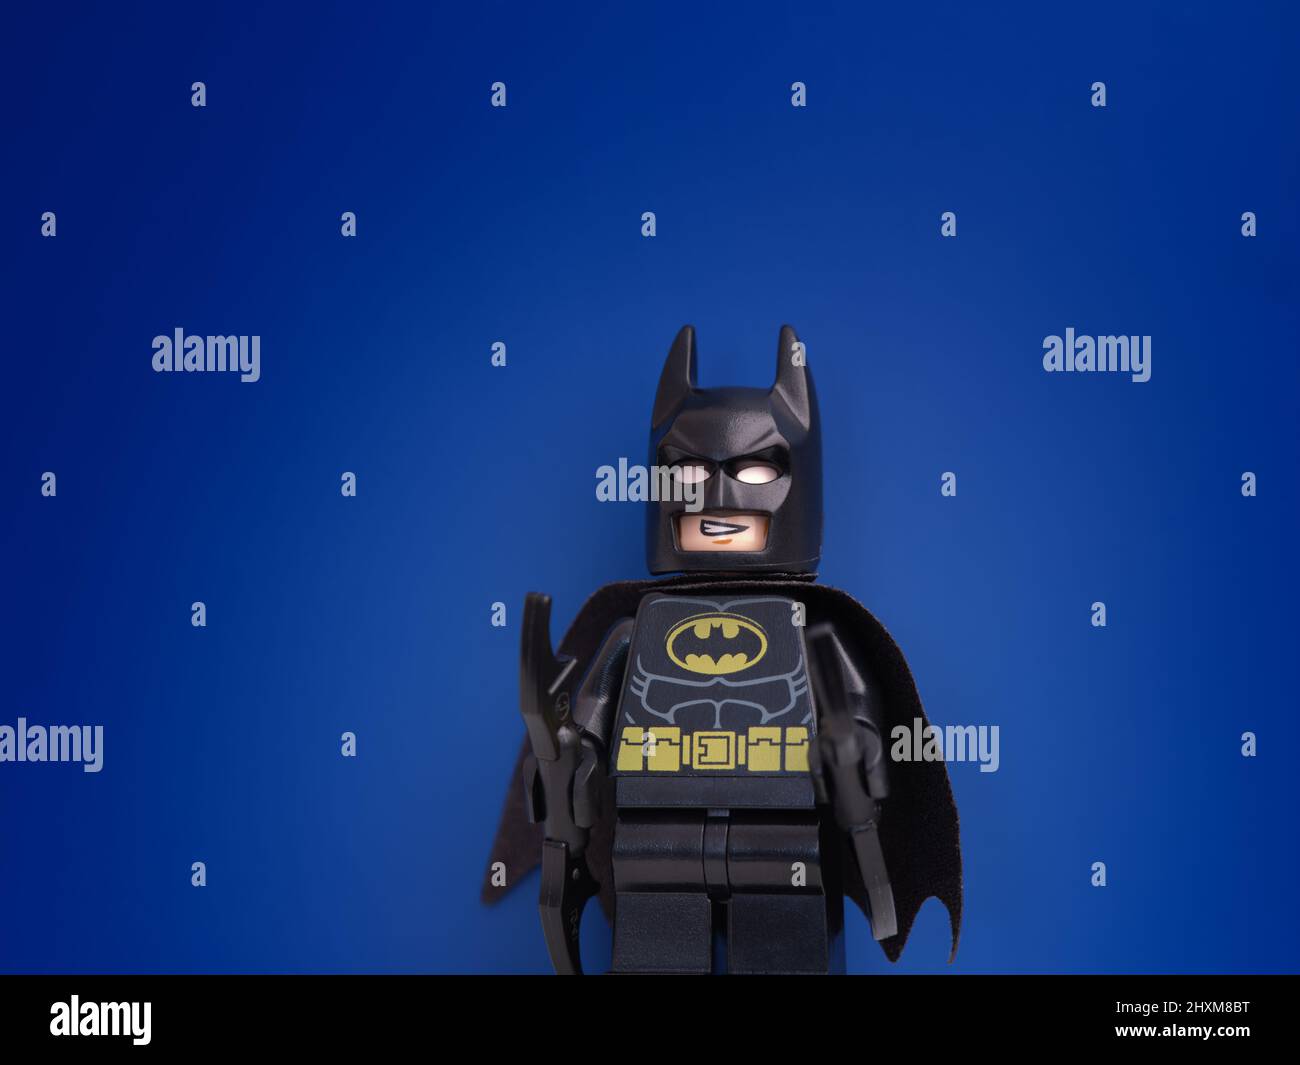 Lego Batman High Resolution Stock Photography and Images - Alamy